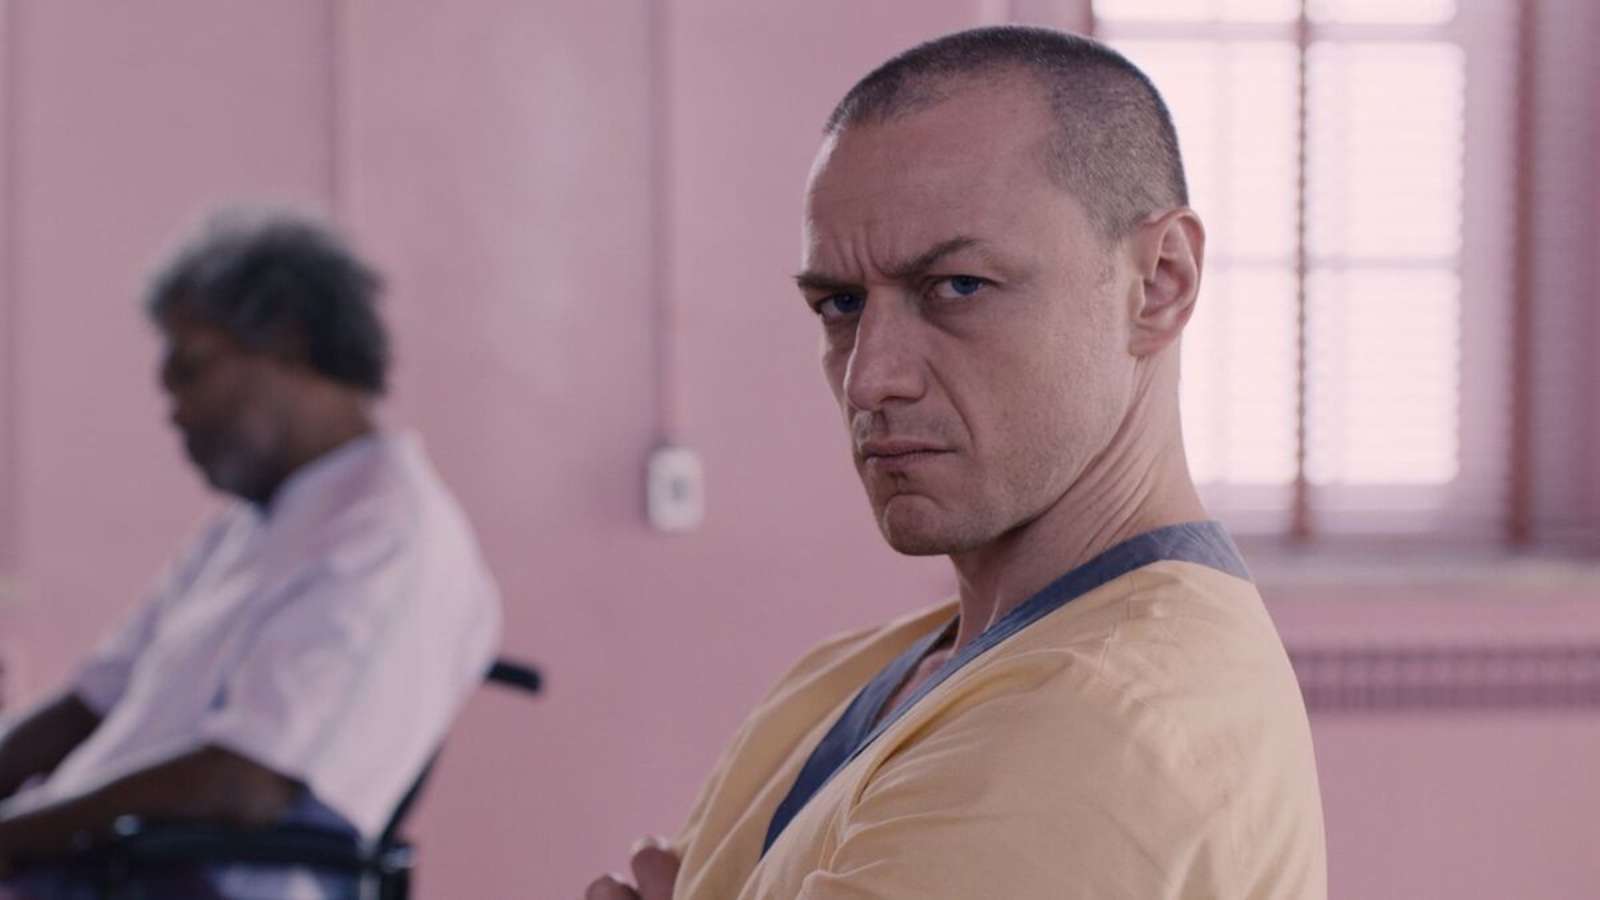 James McAvoy in Glass as Kevin.